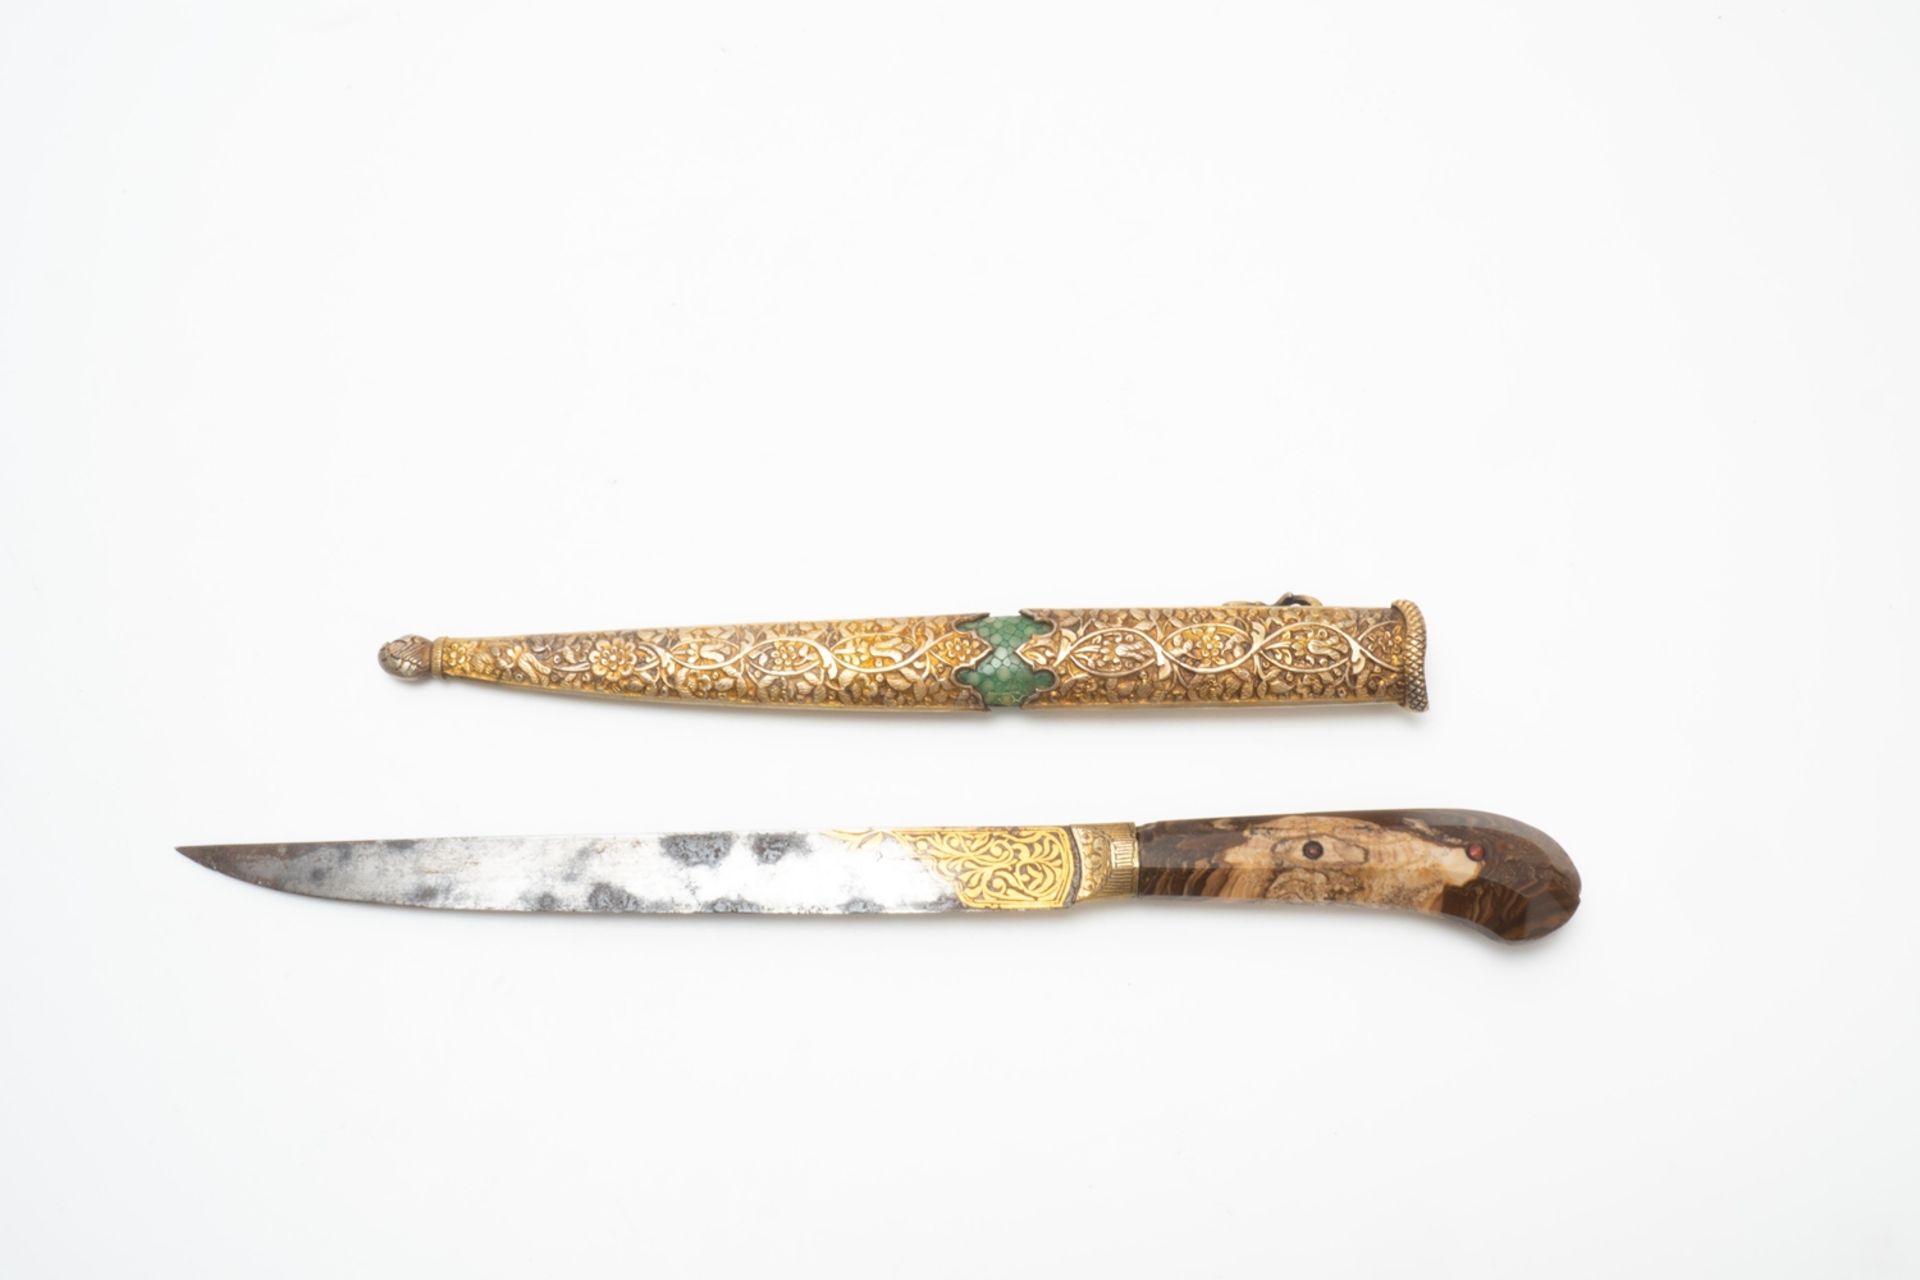 Indian/Oriental ornate dagger with scabbard